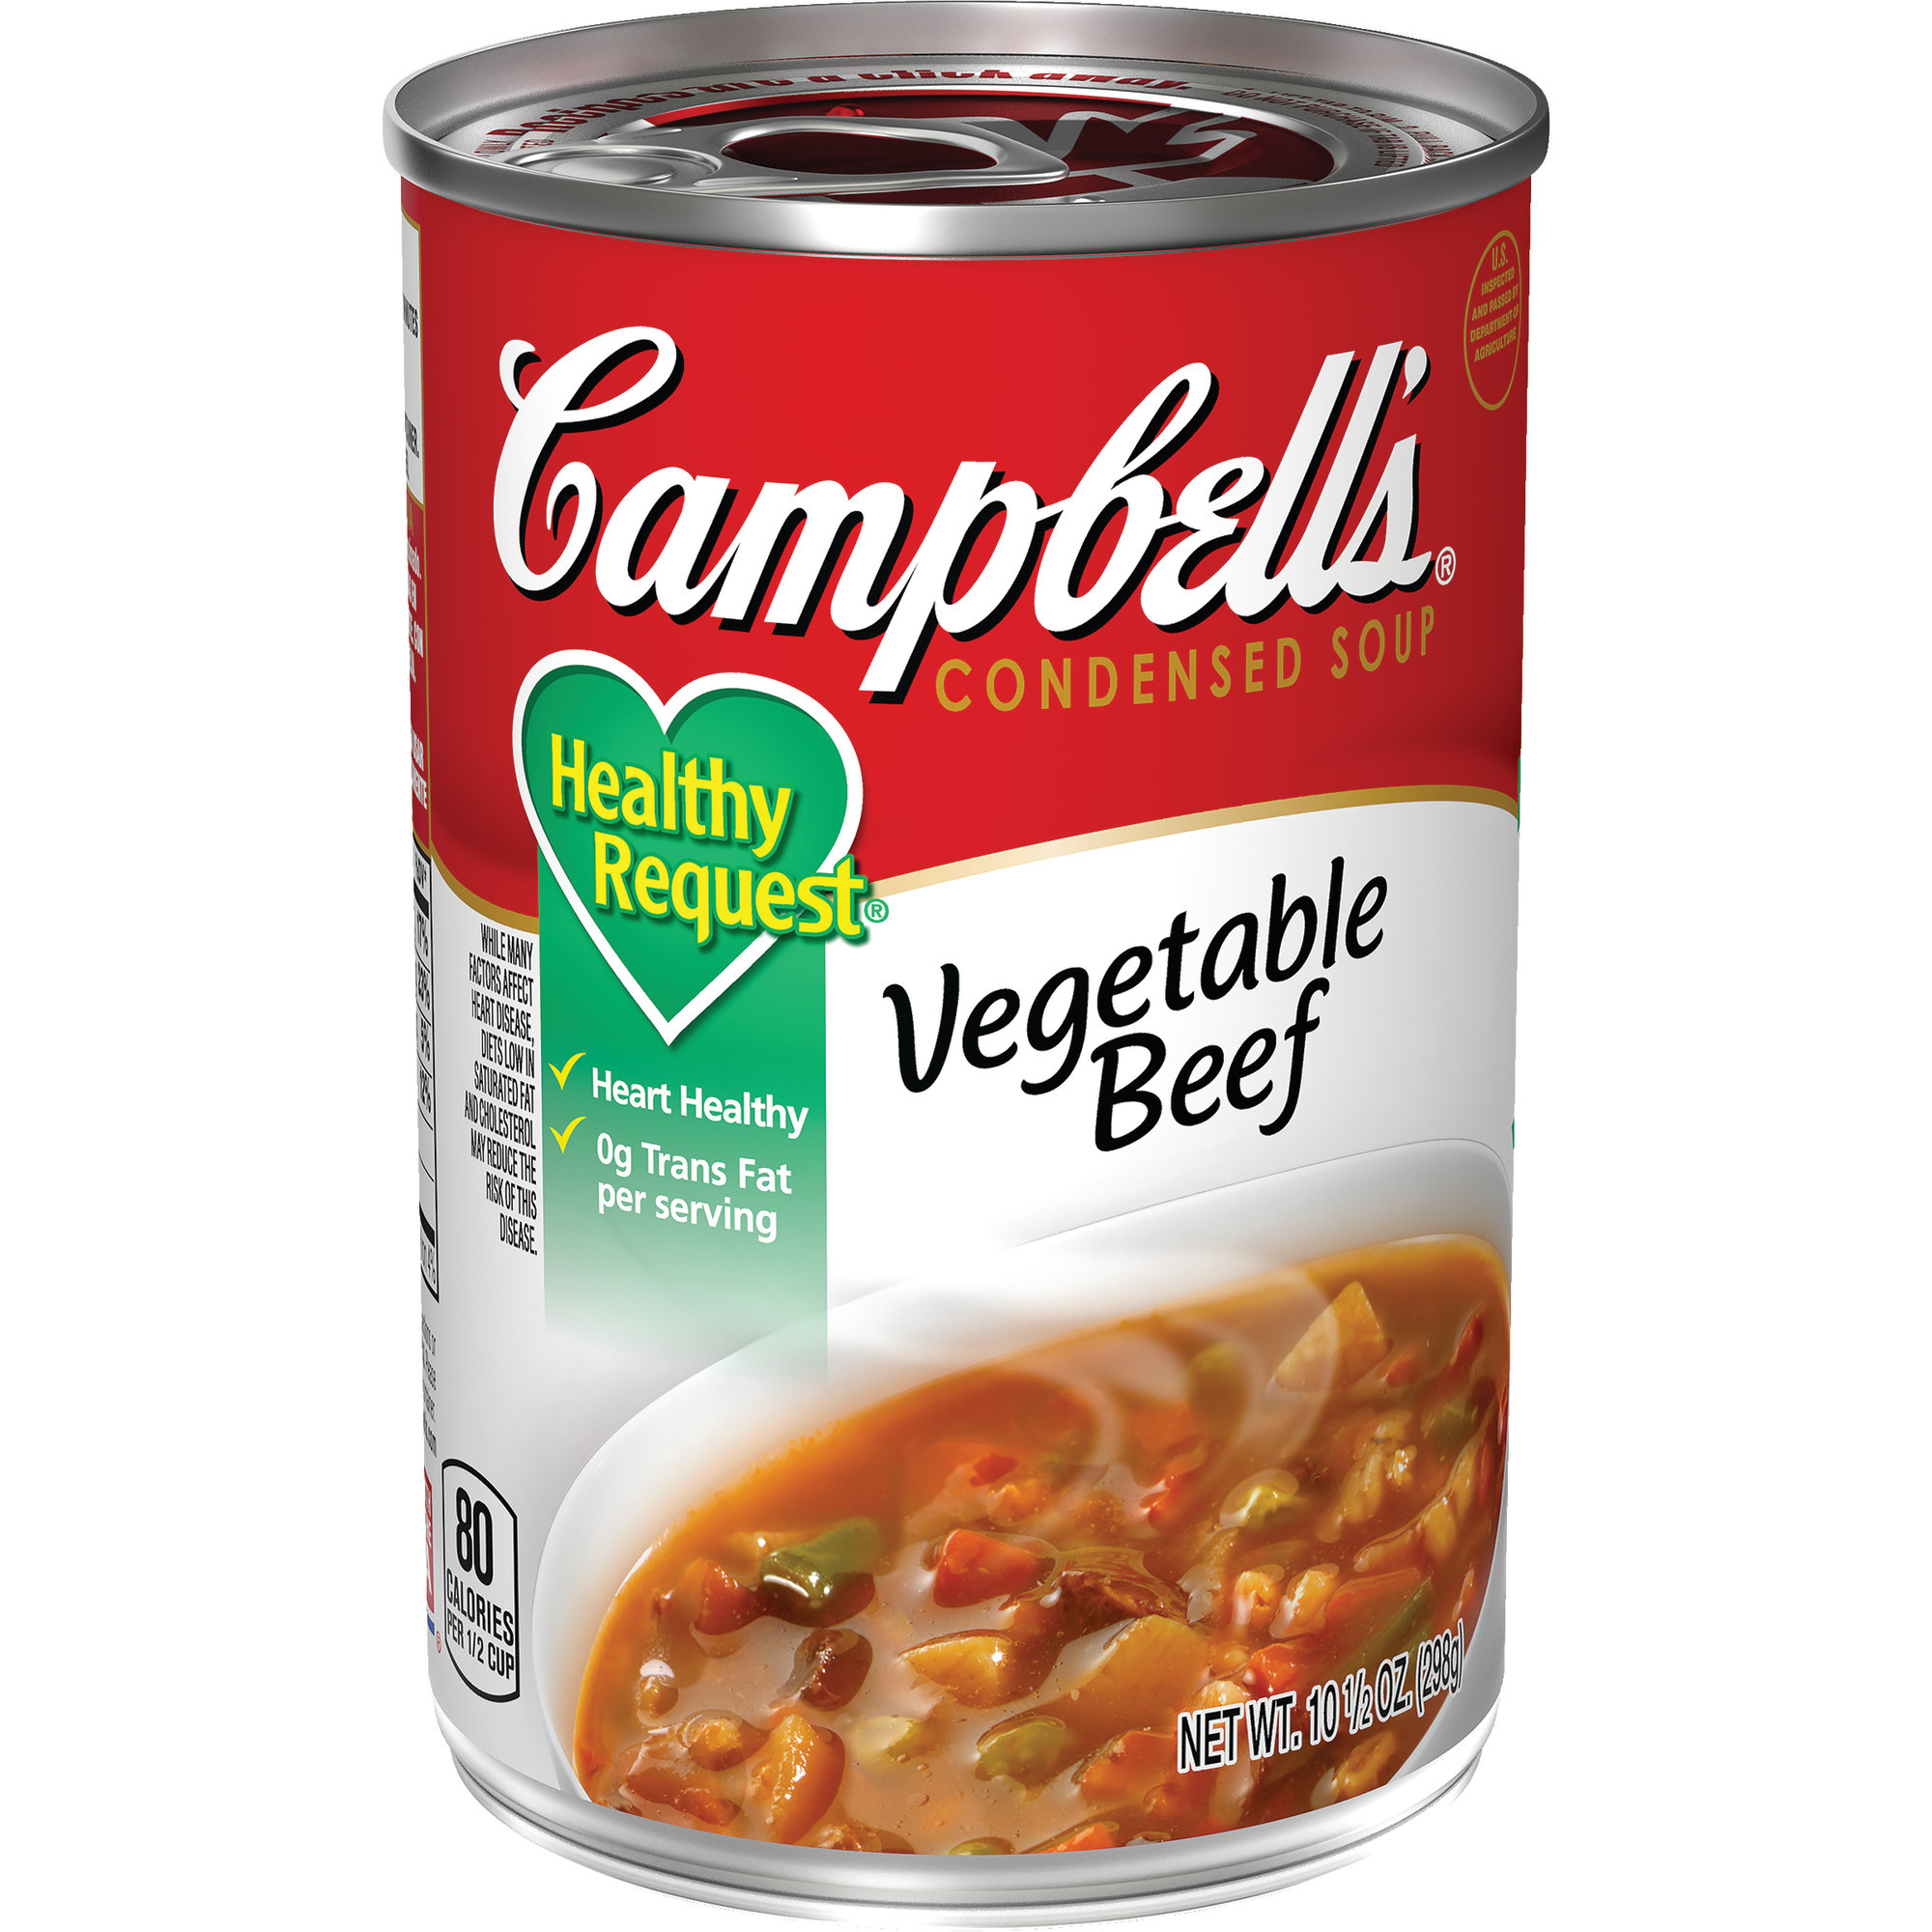 15  Ways How to Make the Best Campbell's Vegetable Beef soup
 You Ever Tasted